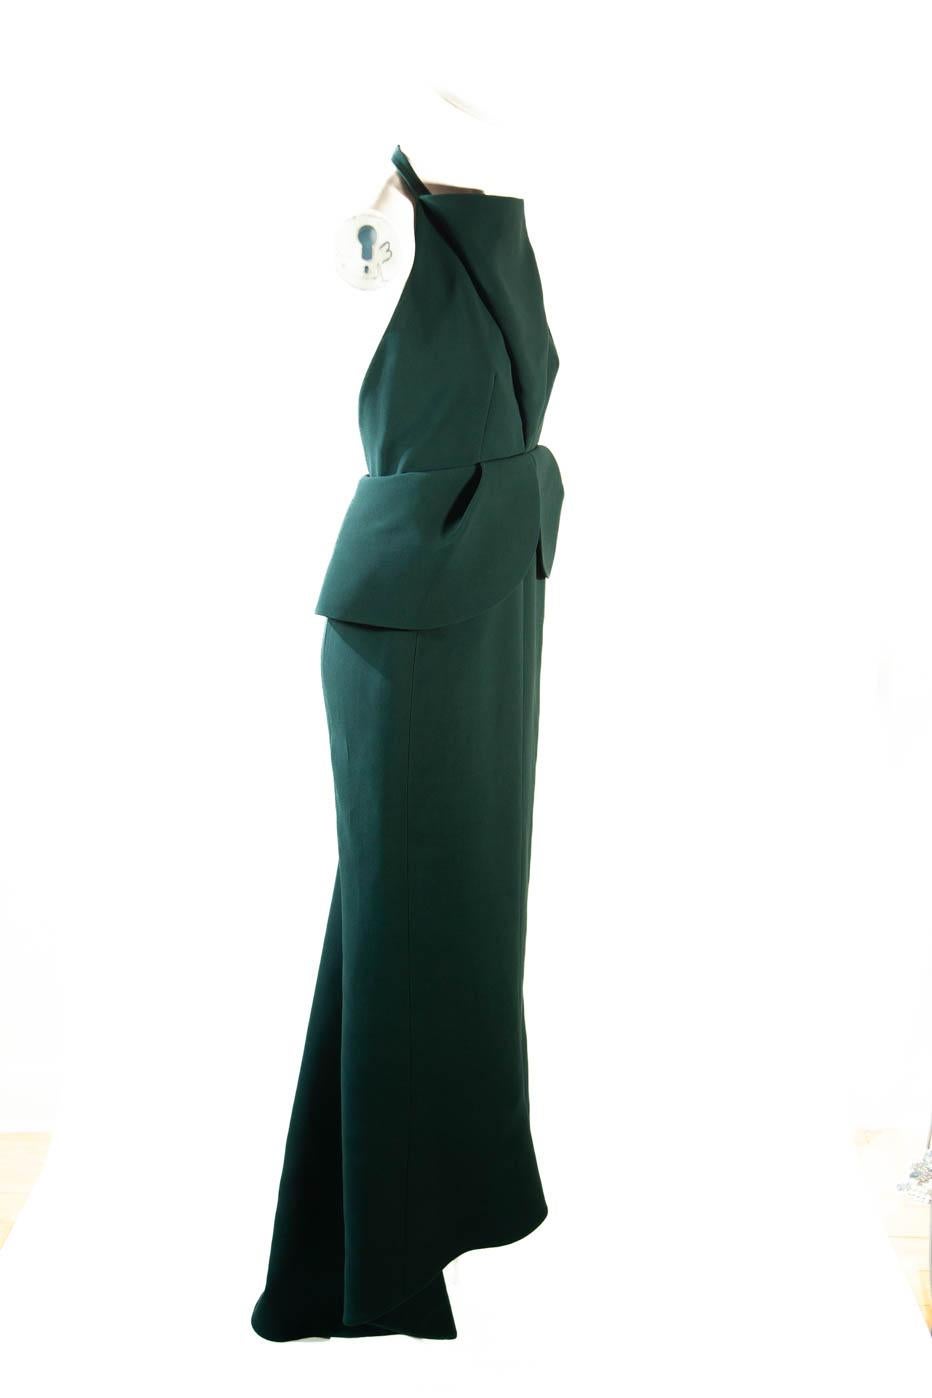 Balenciaga Haute Couture Gown, 2013 In Excellent Condition For Sale In Kingston, NY